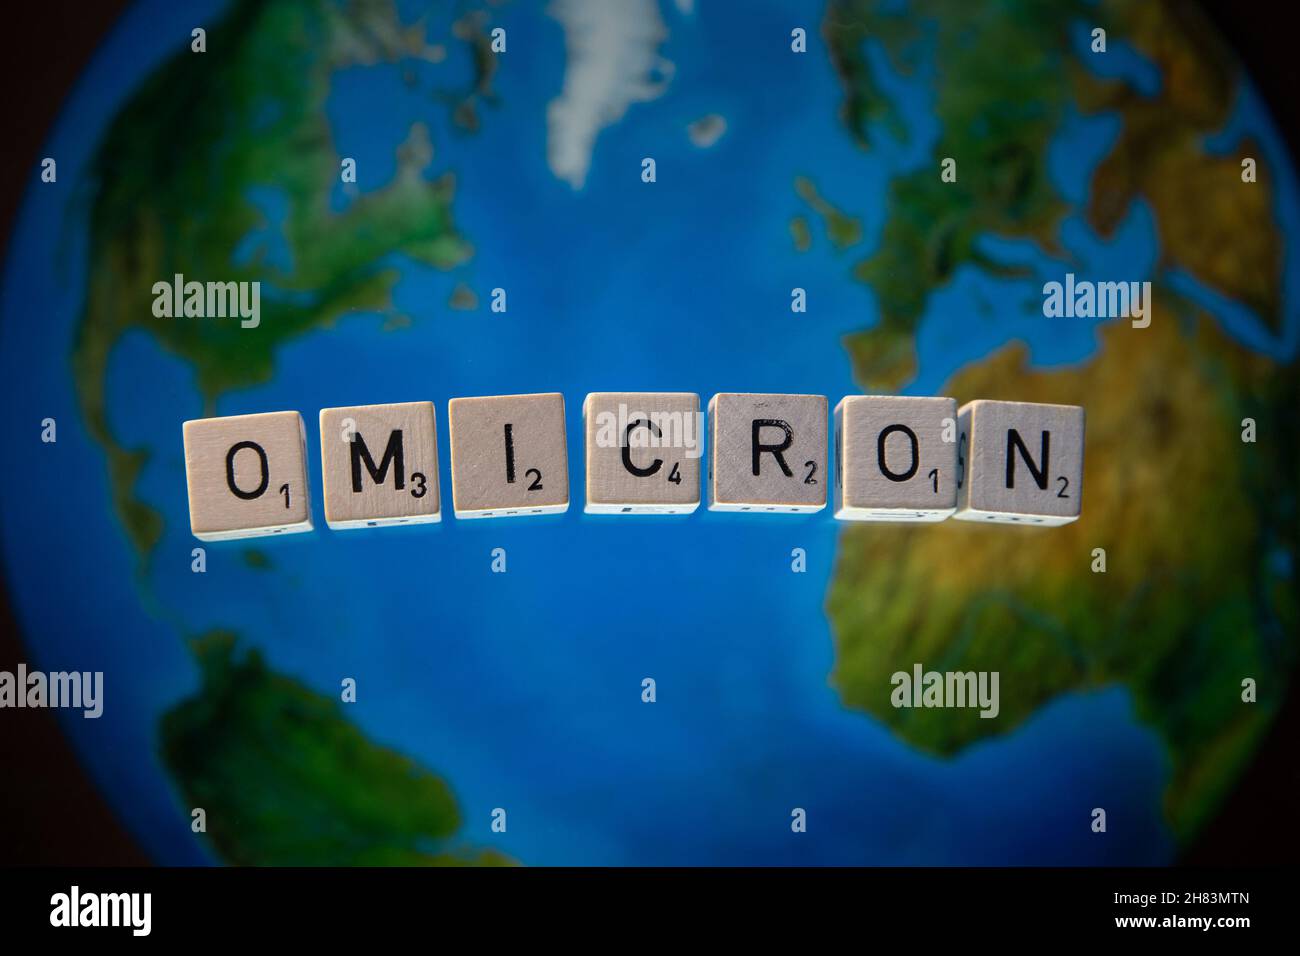 Omicron  Letters spelling out Omicron, The name the WHO has given to a new variant of Covid-19  Countries around the world are introducing new travel Stock Photo